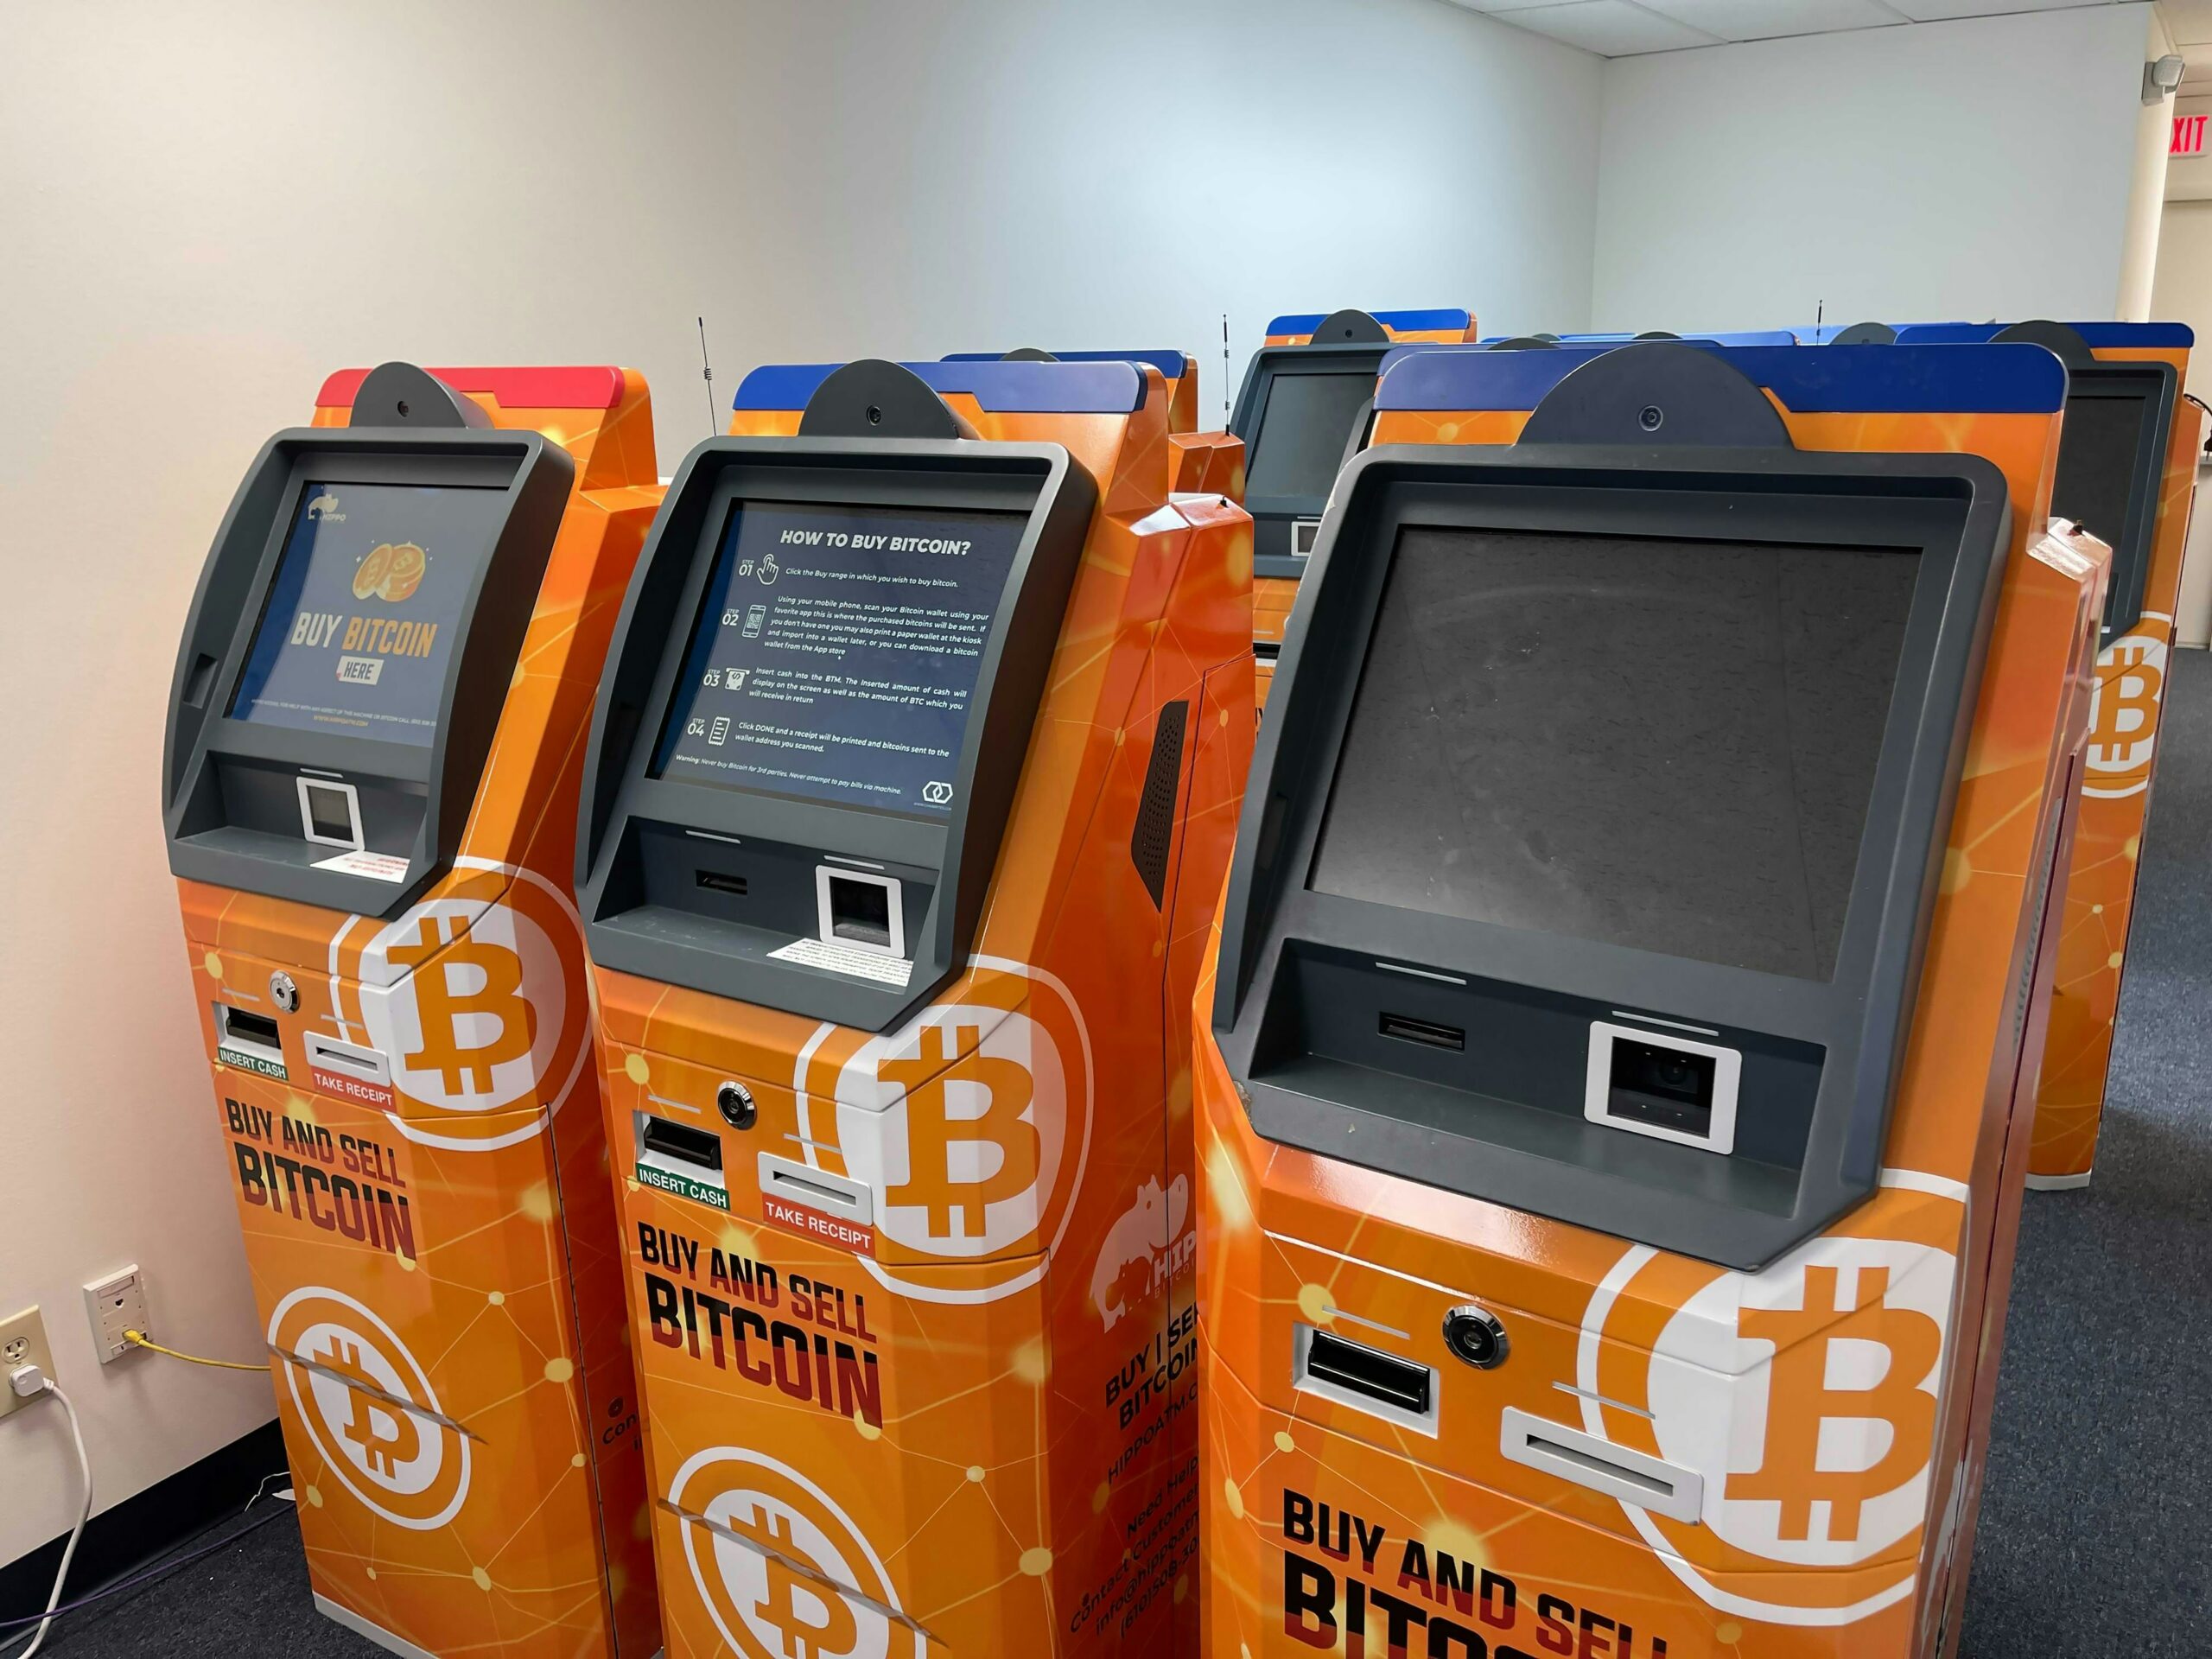 The Bitcoin Lightning ATM is an innovative device that allows users to easily purchase small amounts of Bitcoin using physical coins.